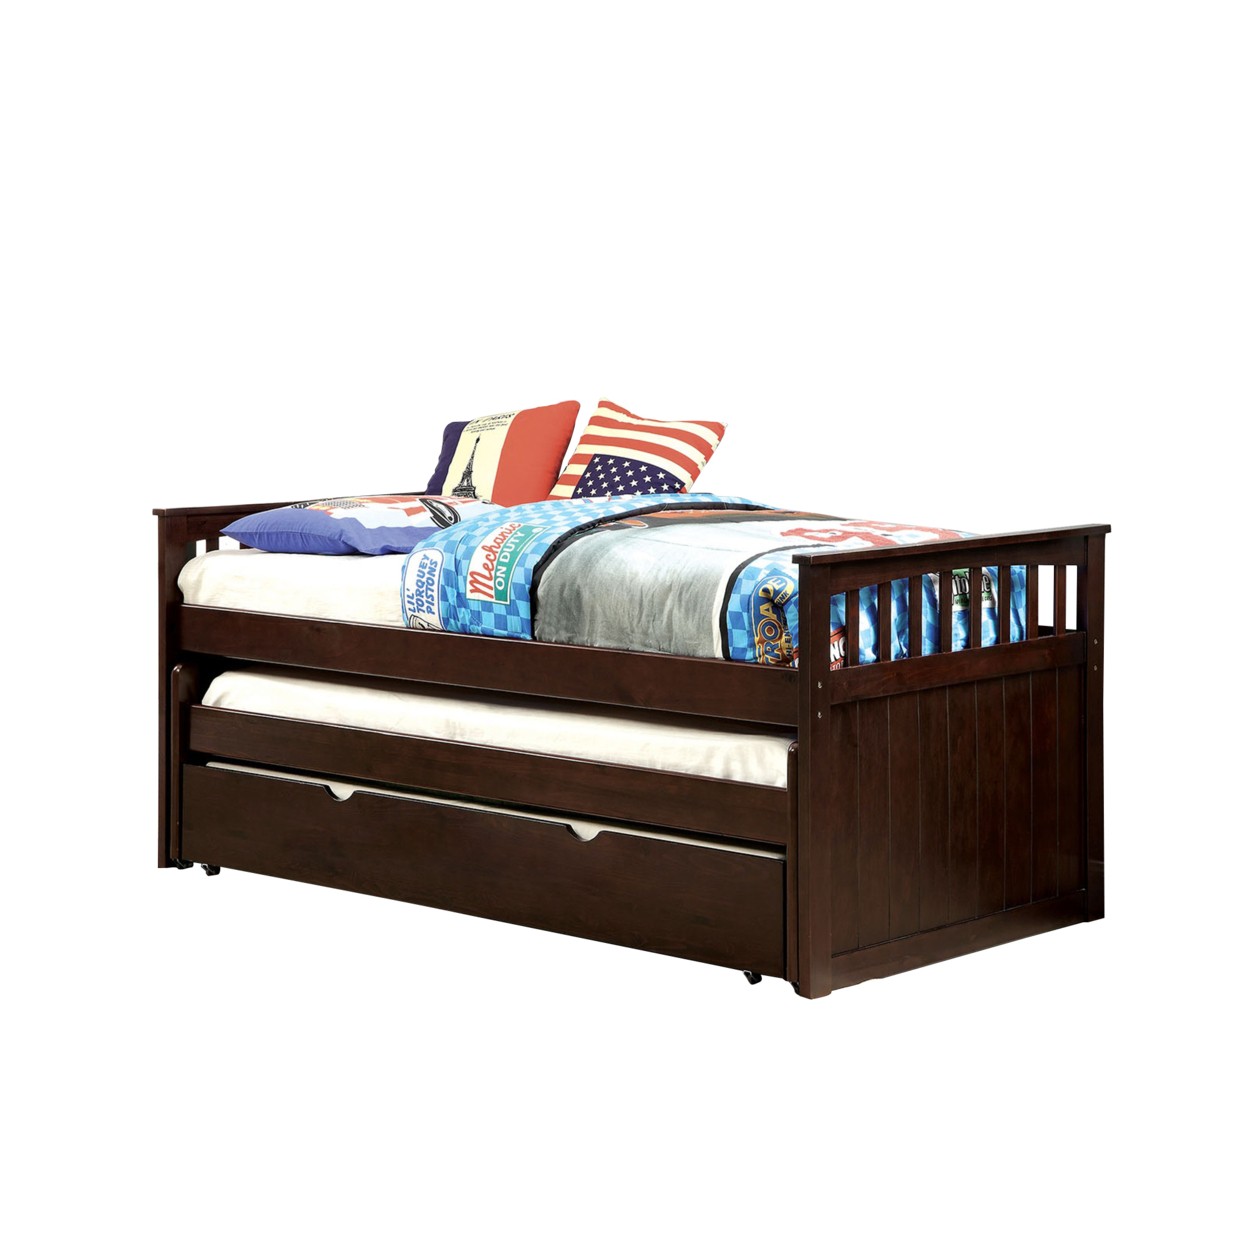 Mission style wooden daybed with slatted design espresso